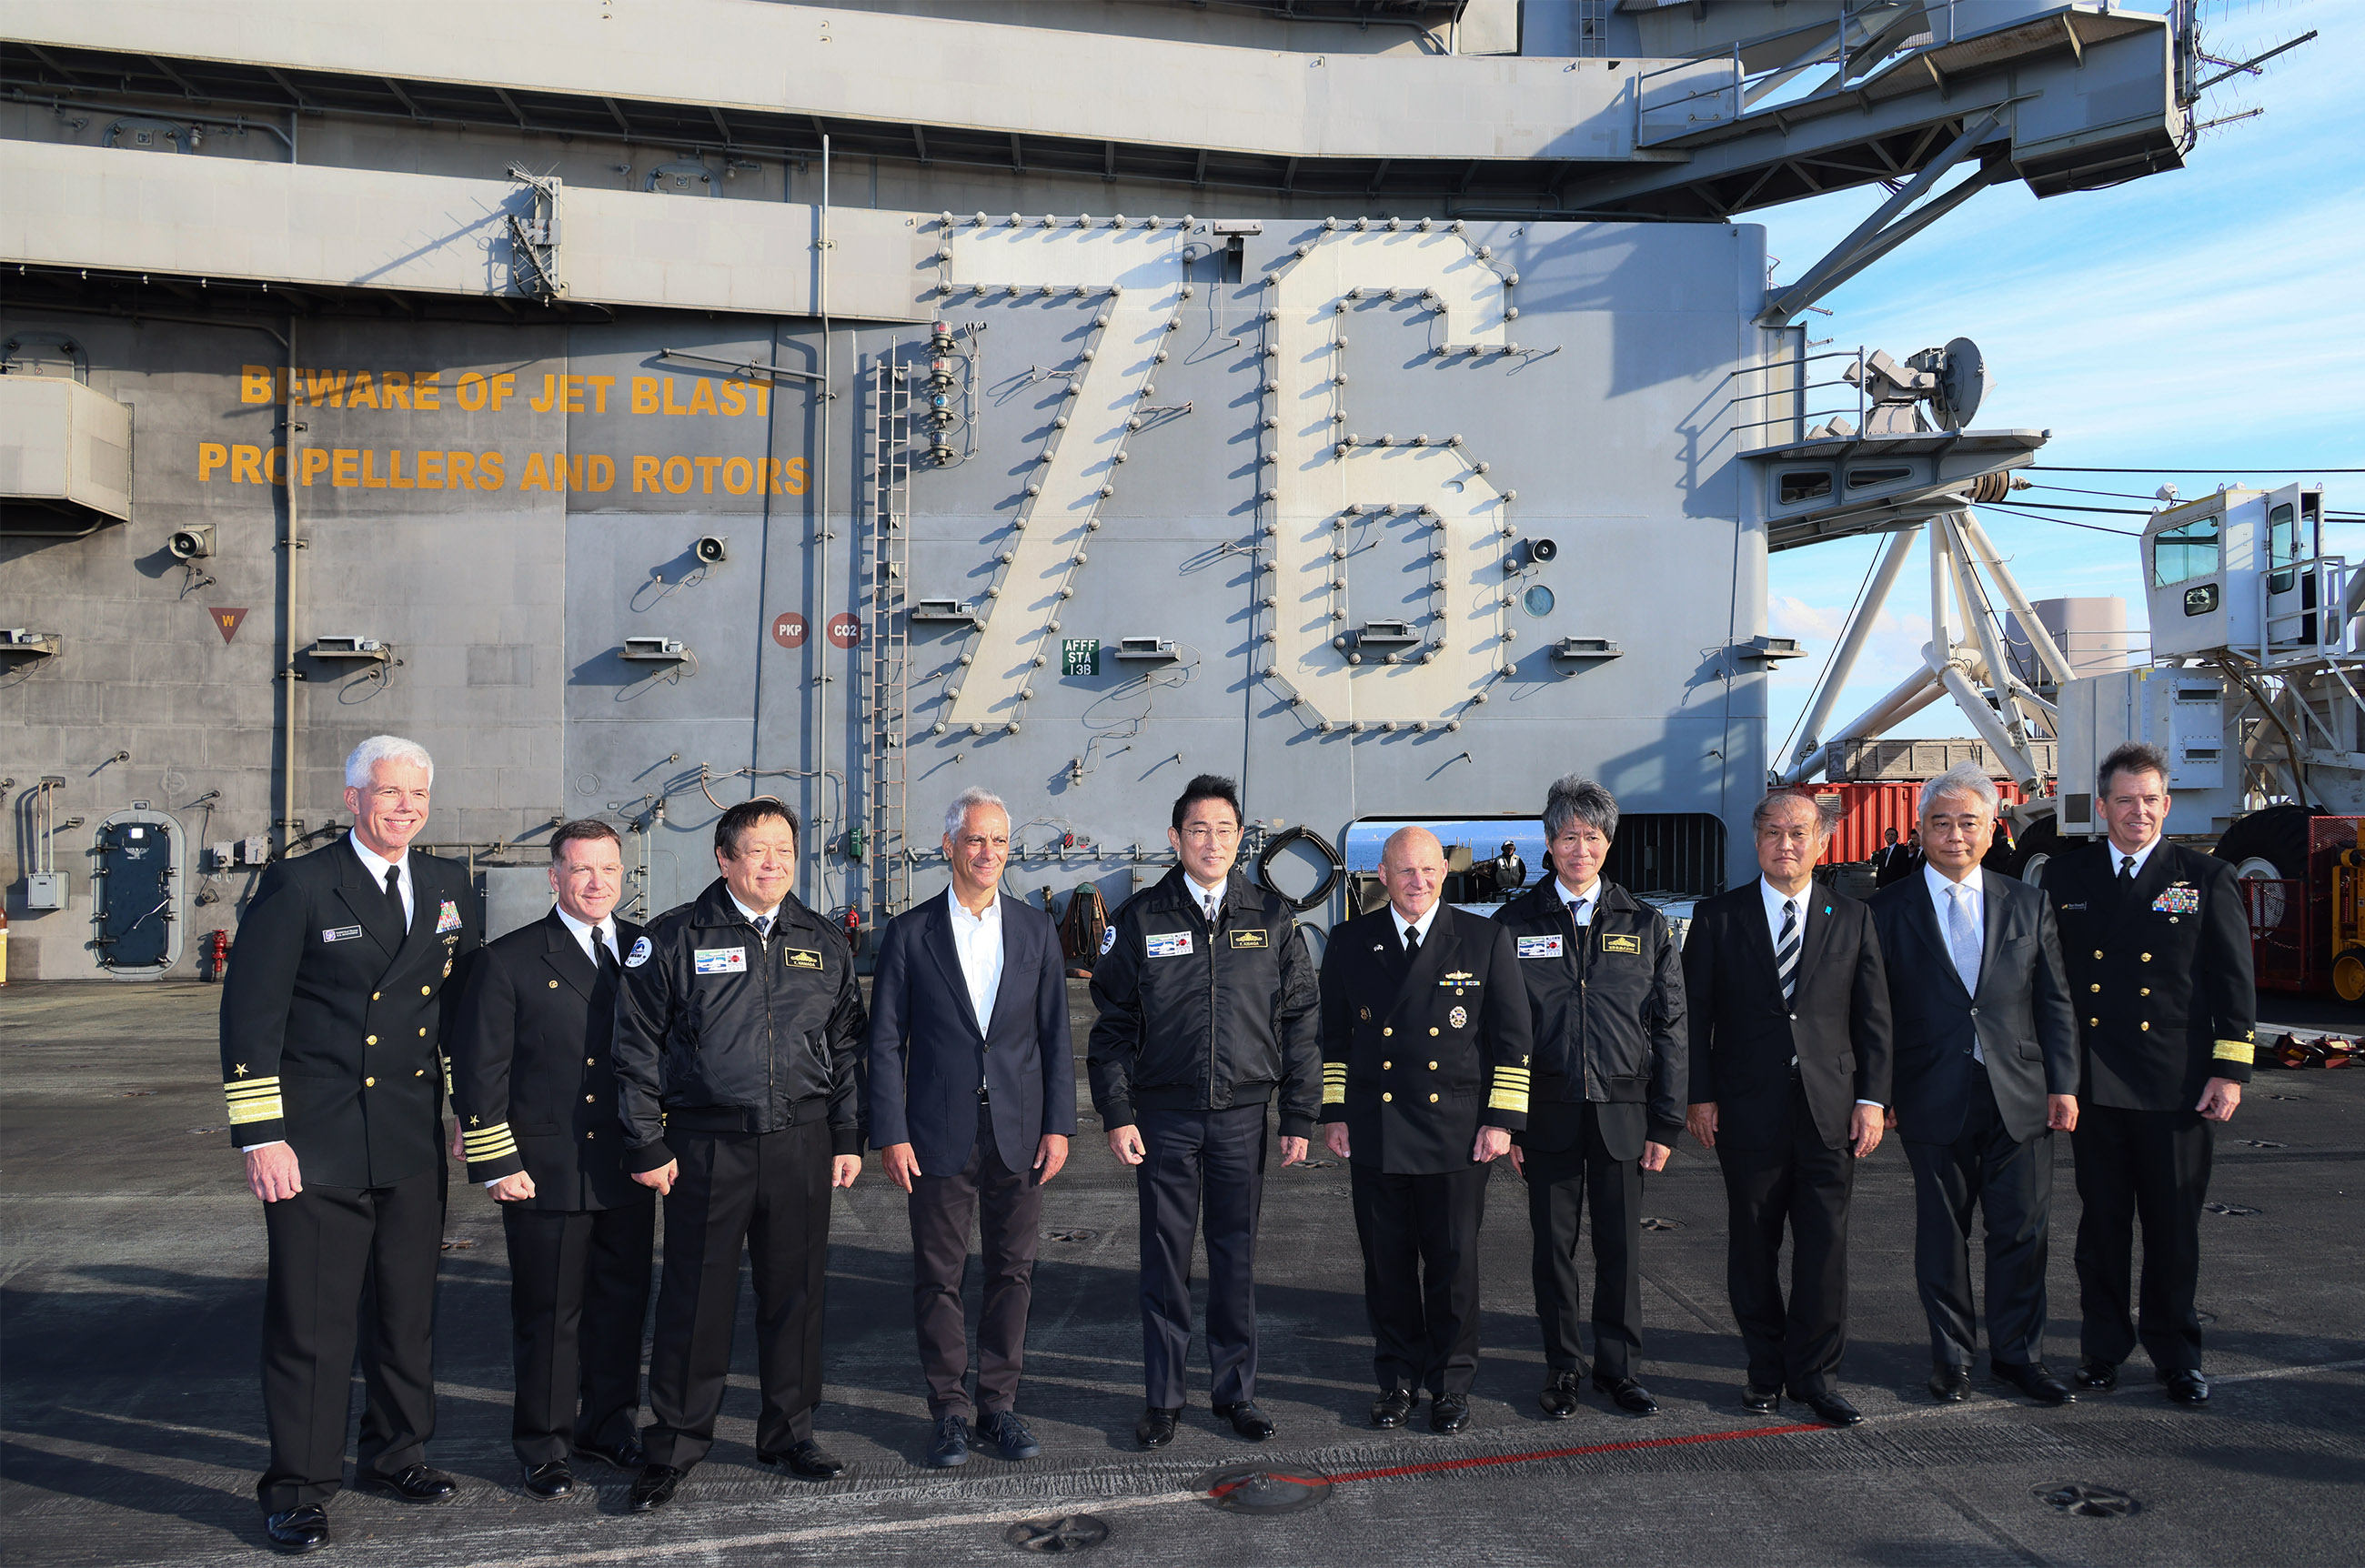 Photograph of the Prime Minister touring the U.S. aircraft carrier (6)